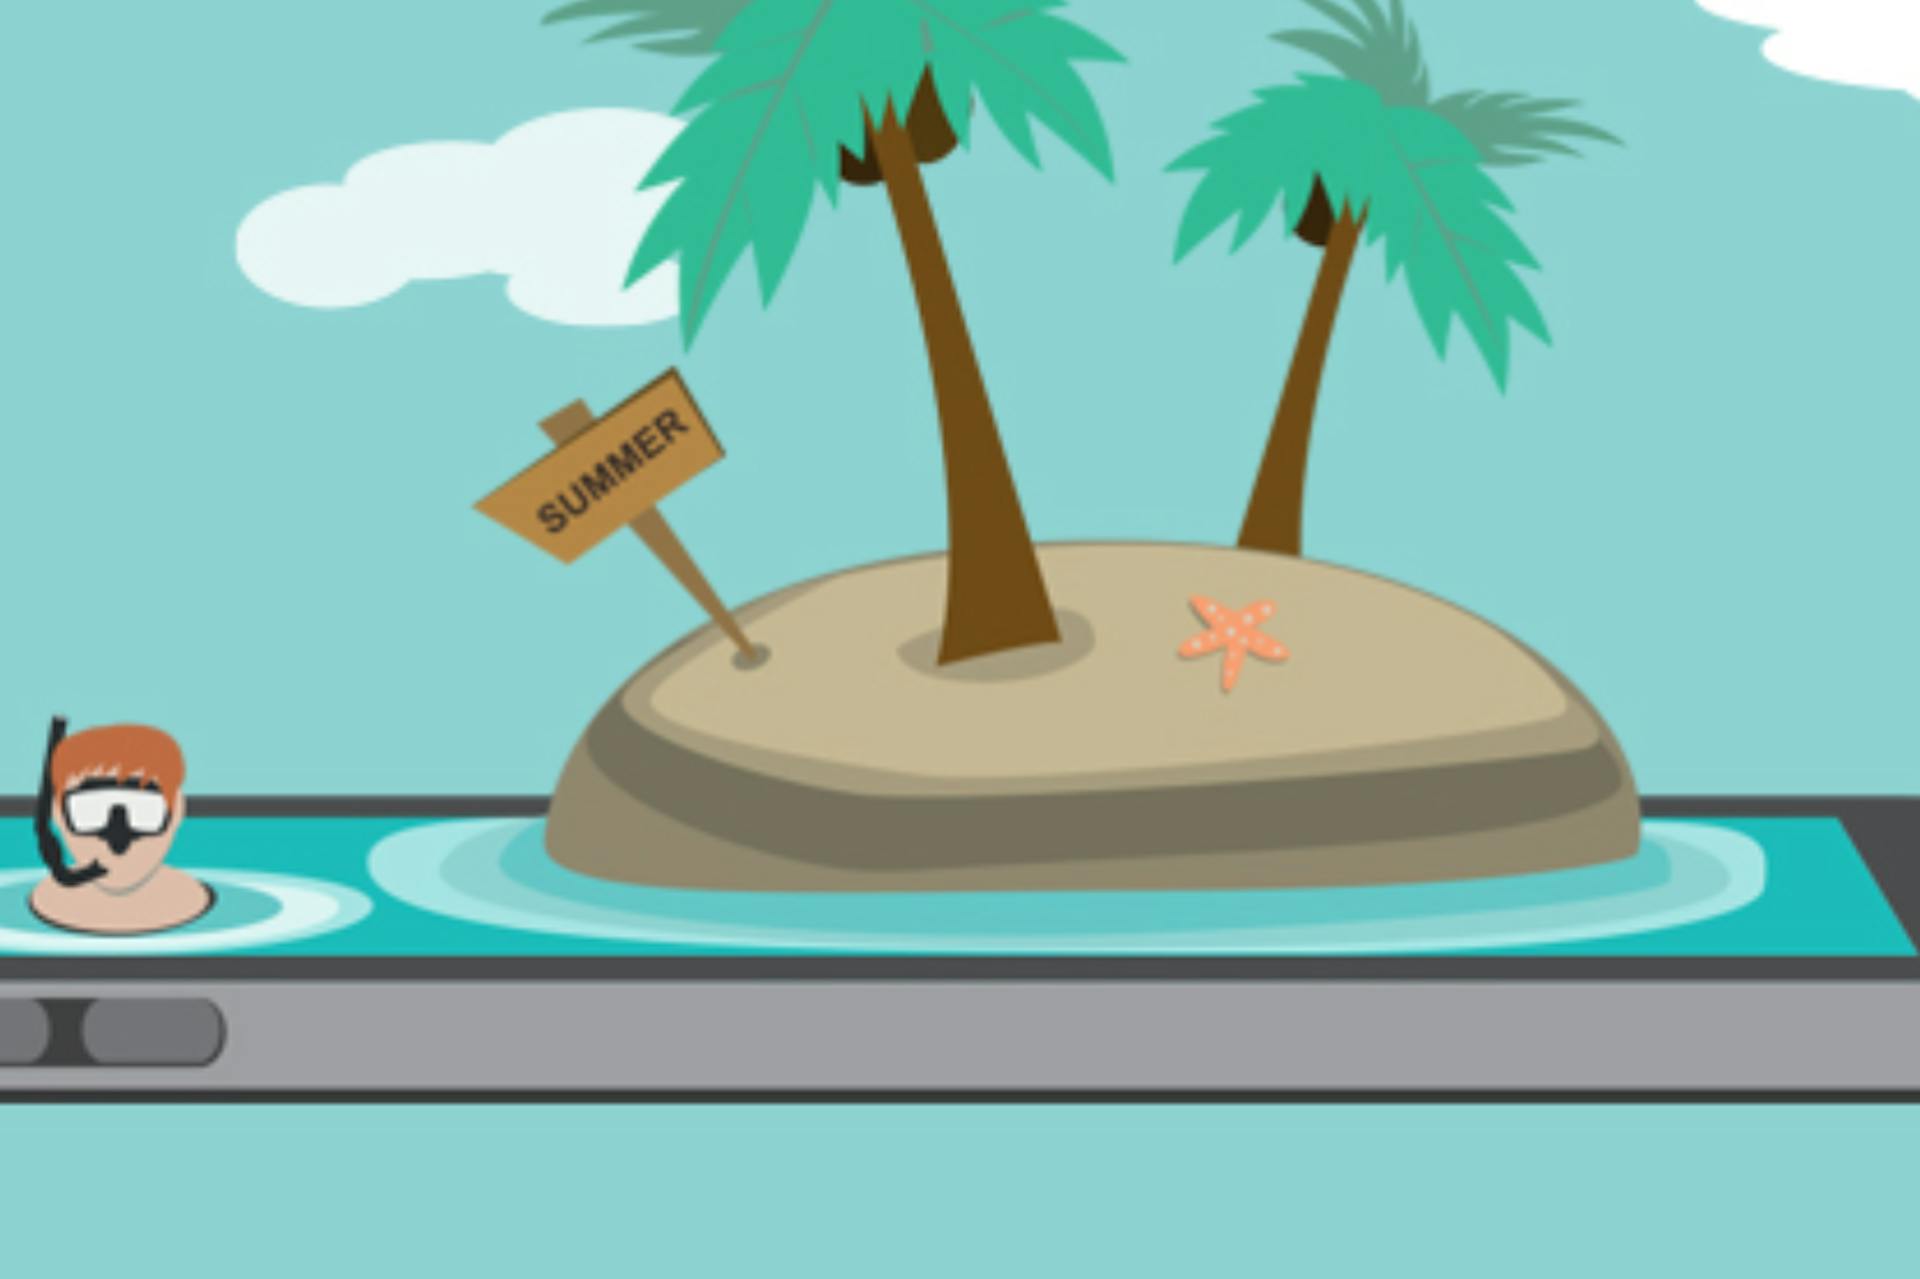 Illustration of a smartphone on vacation